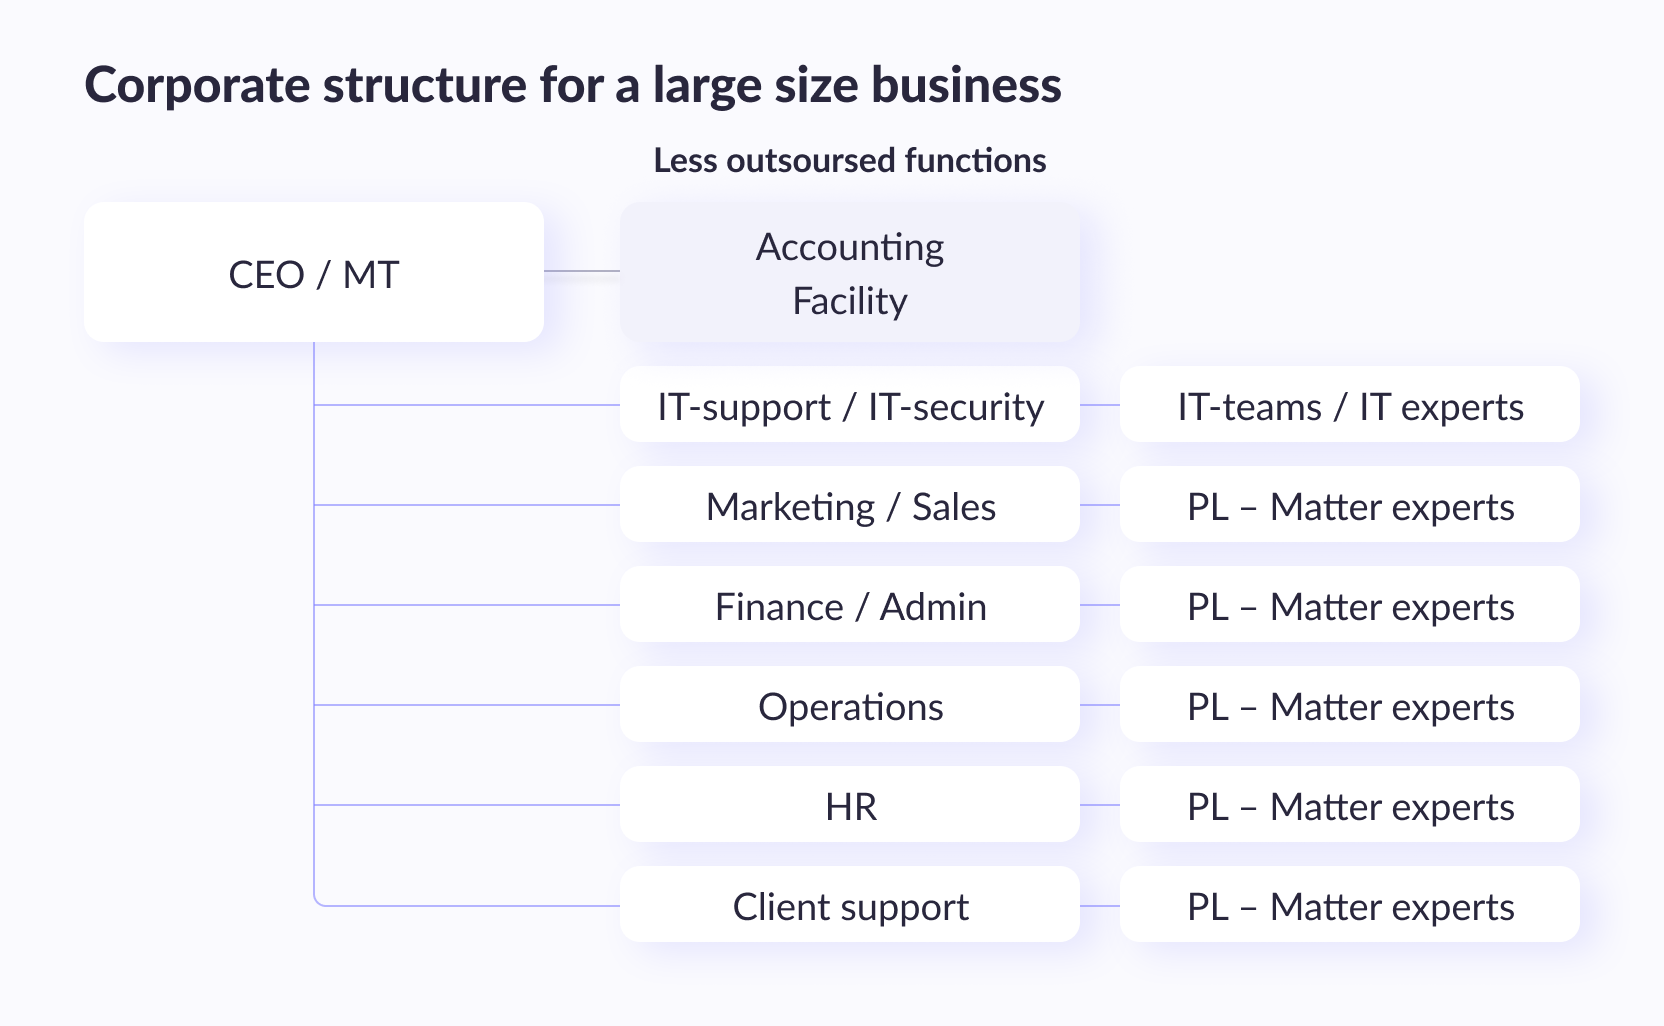 Corporate structure for a large business